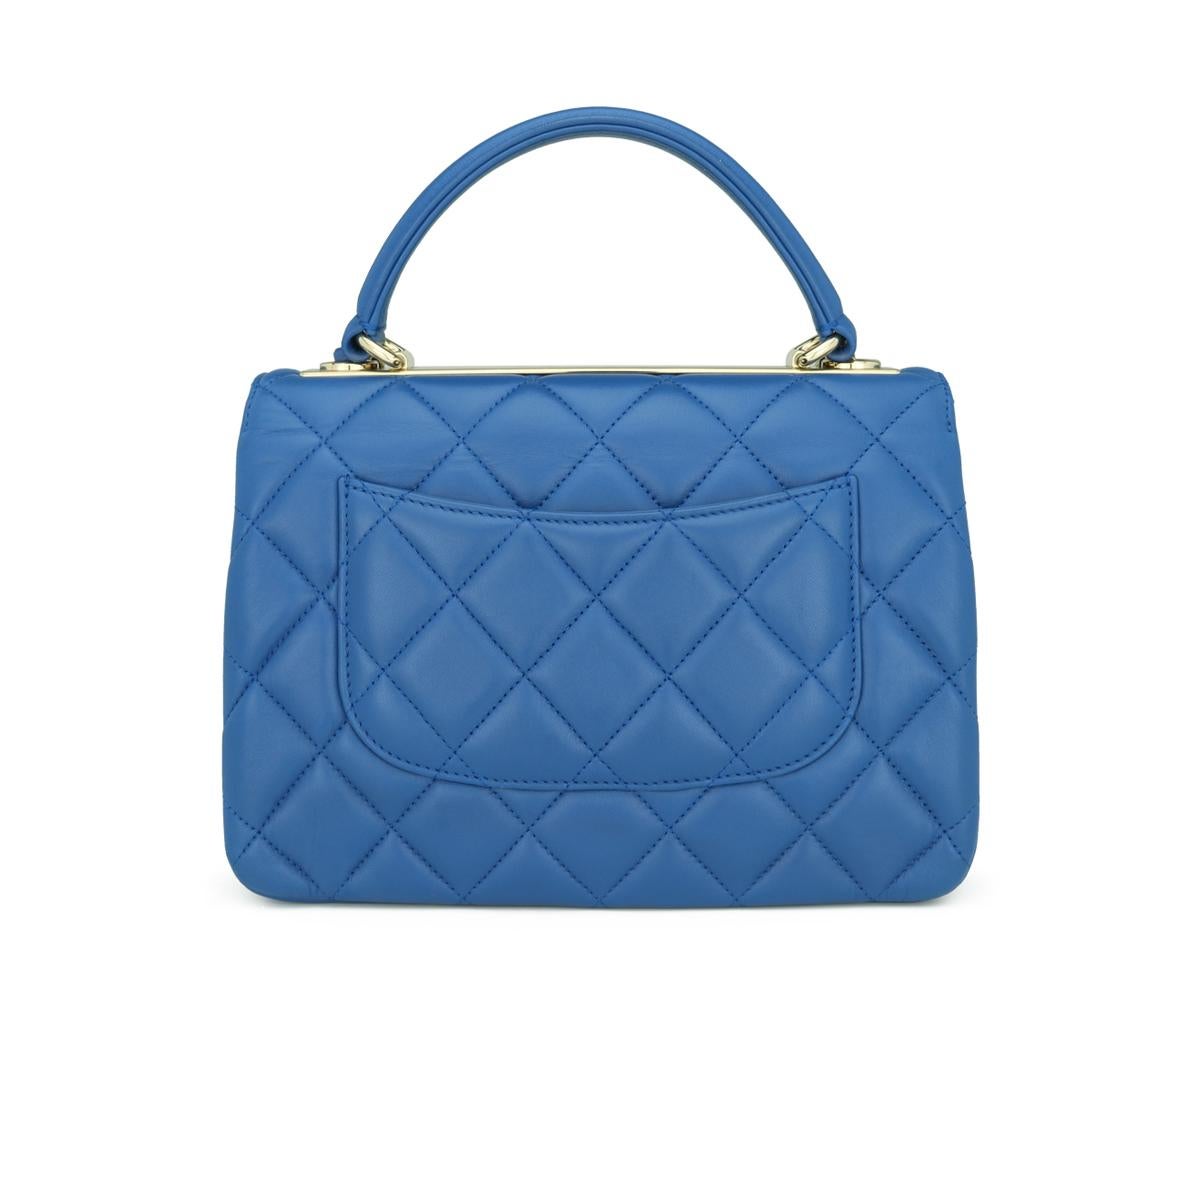 CHANEL Trendy CC Bag Small Blue Lambskin Light Gold Hardware 2019 In Good Condition For Sale In Huddersfield, GB